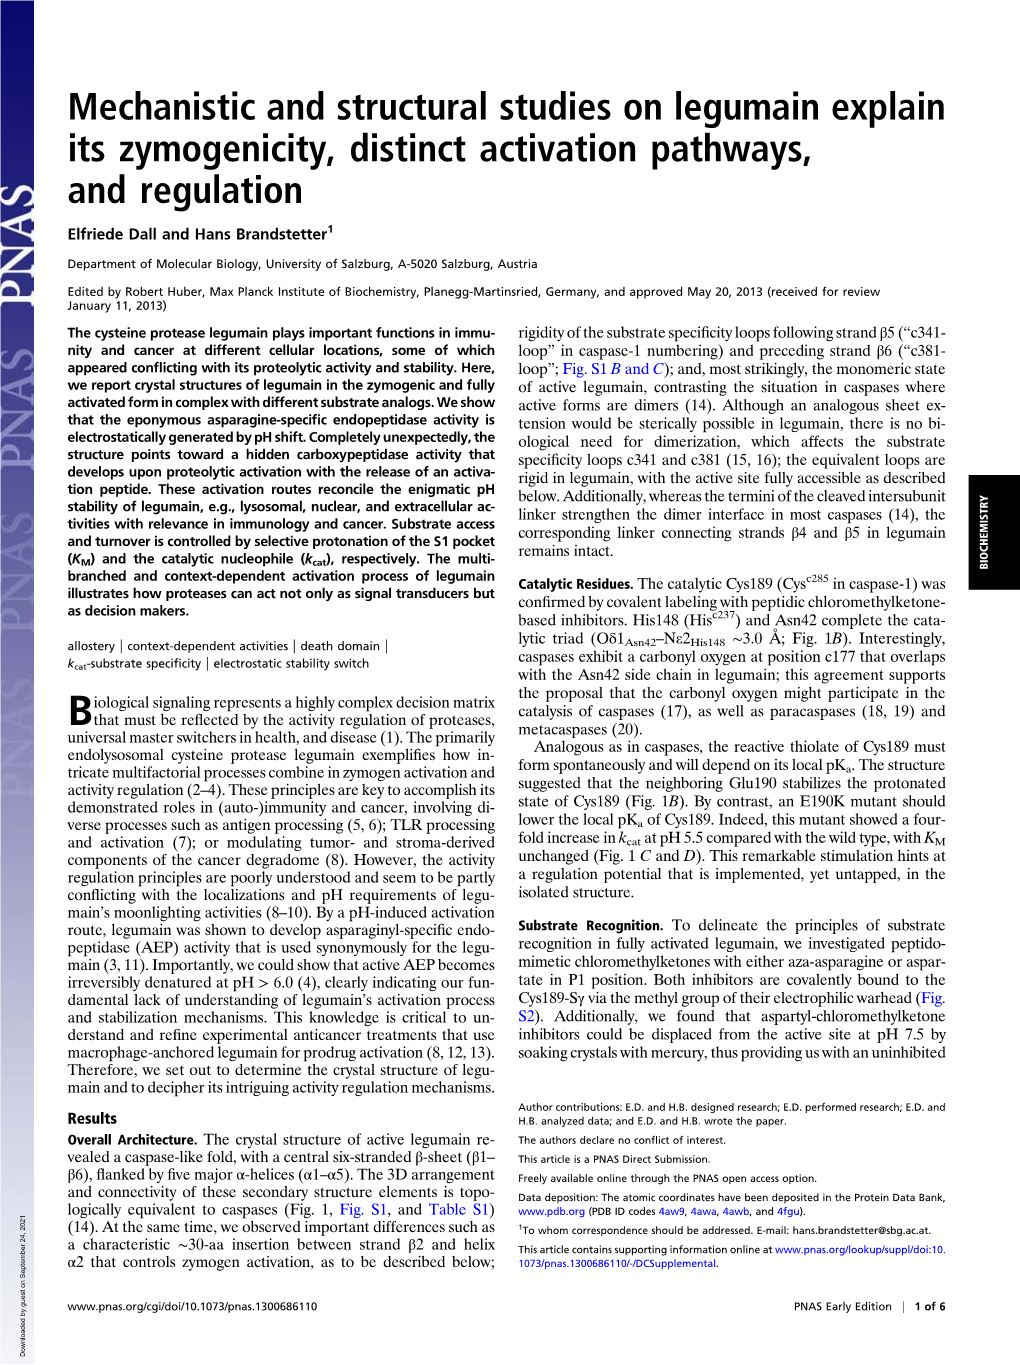 Mechanistic and Structural Studies on Legumain Explain Its Zymogenicity, Distinct Activation Pathways, and Regulation